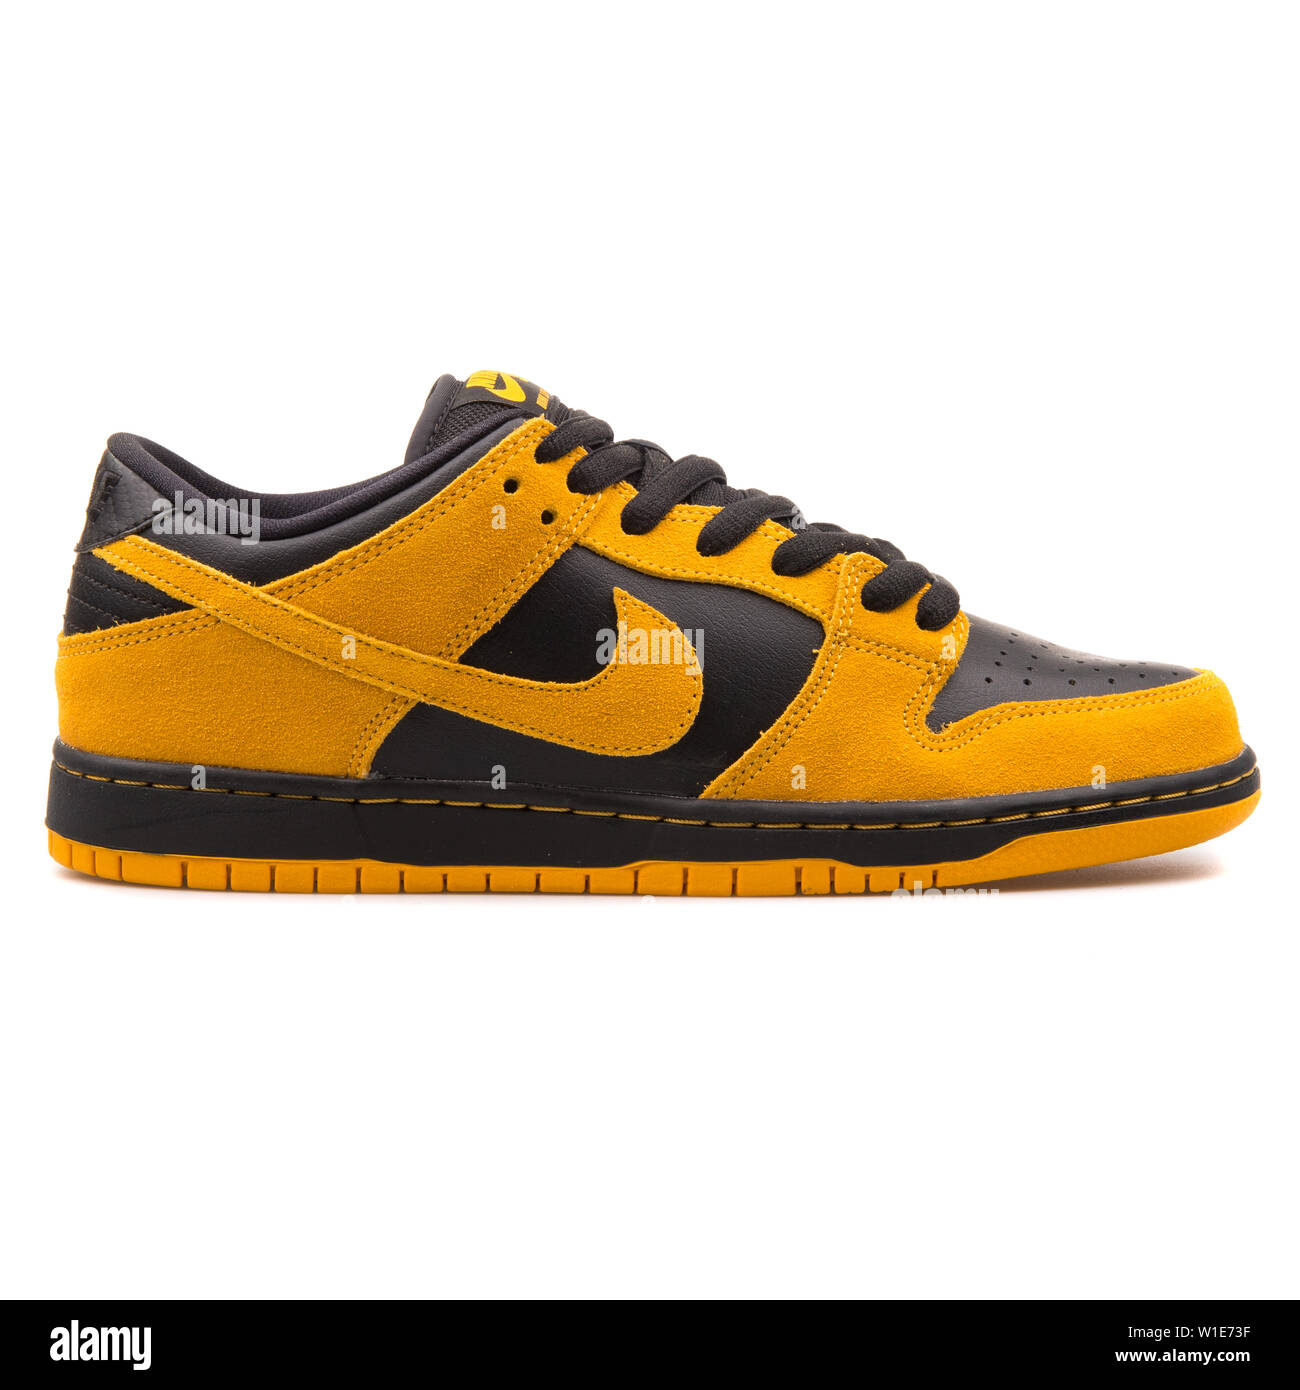 VIENNA, AUSTRIA - AUGUST 25, 2017: Nike Dunk Low Pro SB gold and black  sneaker on white background Stock Photo - Alamy